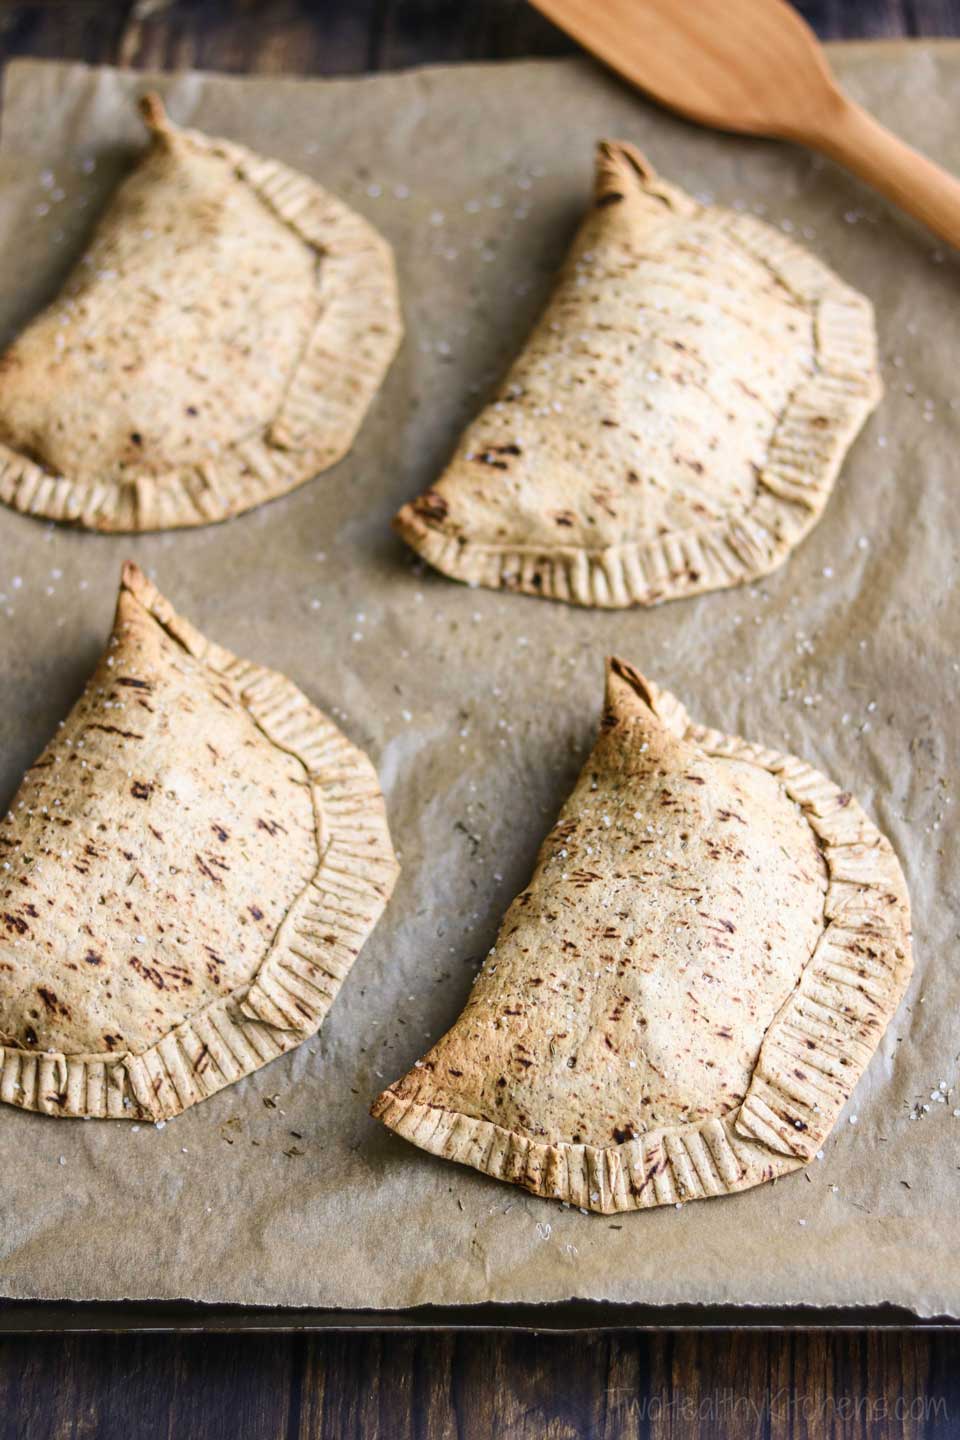 Whole grain flatbreads make for an easy pot pie crust! Our chicken pot pie pockets bake up golden brown and crispy, deliciously seasoned with thyme and coarse salt. It’s this special crust that makes our individual chicken pot pies so perfectly portable! Kinda like healthy, homemade Hot Pockets! | www.TwoHealthyKitchens.com